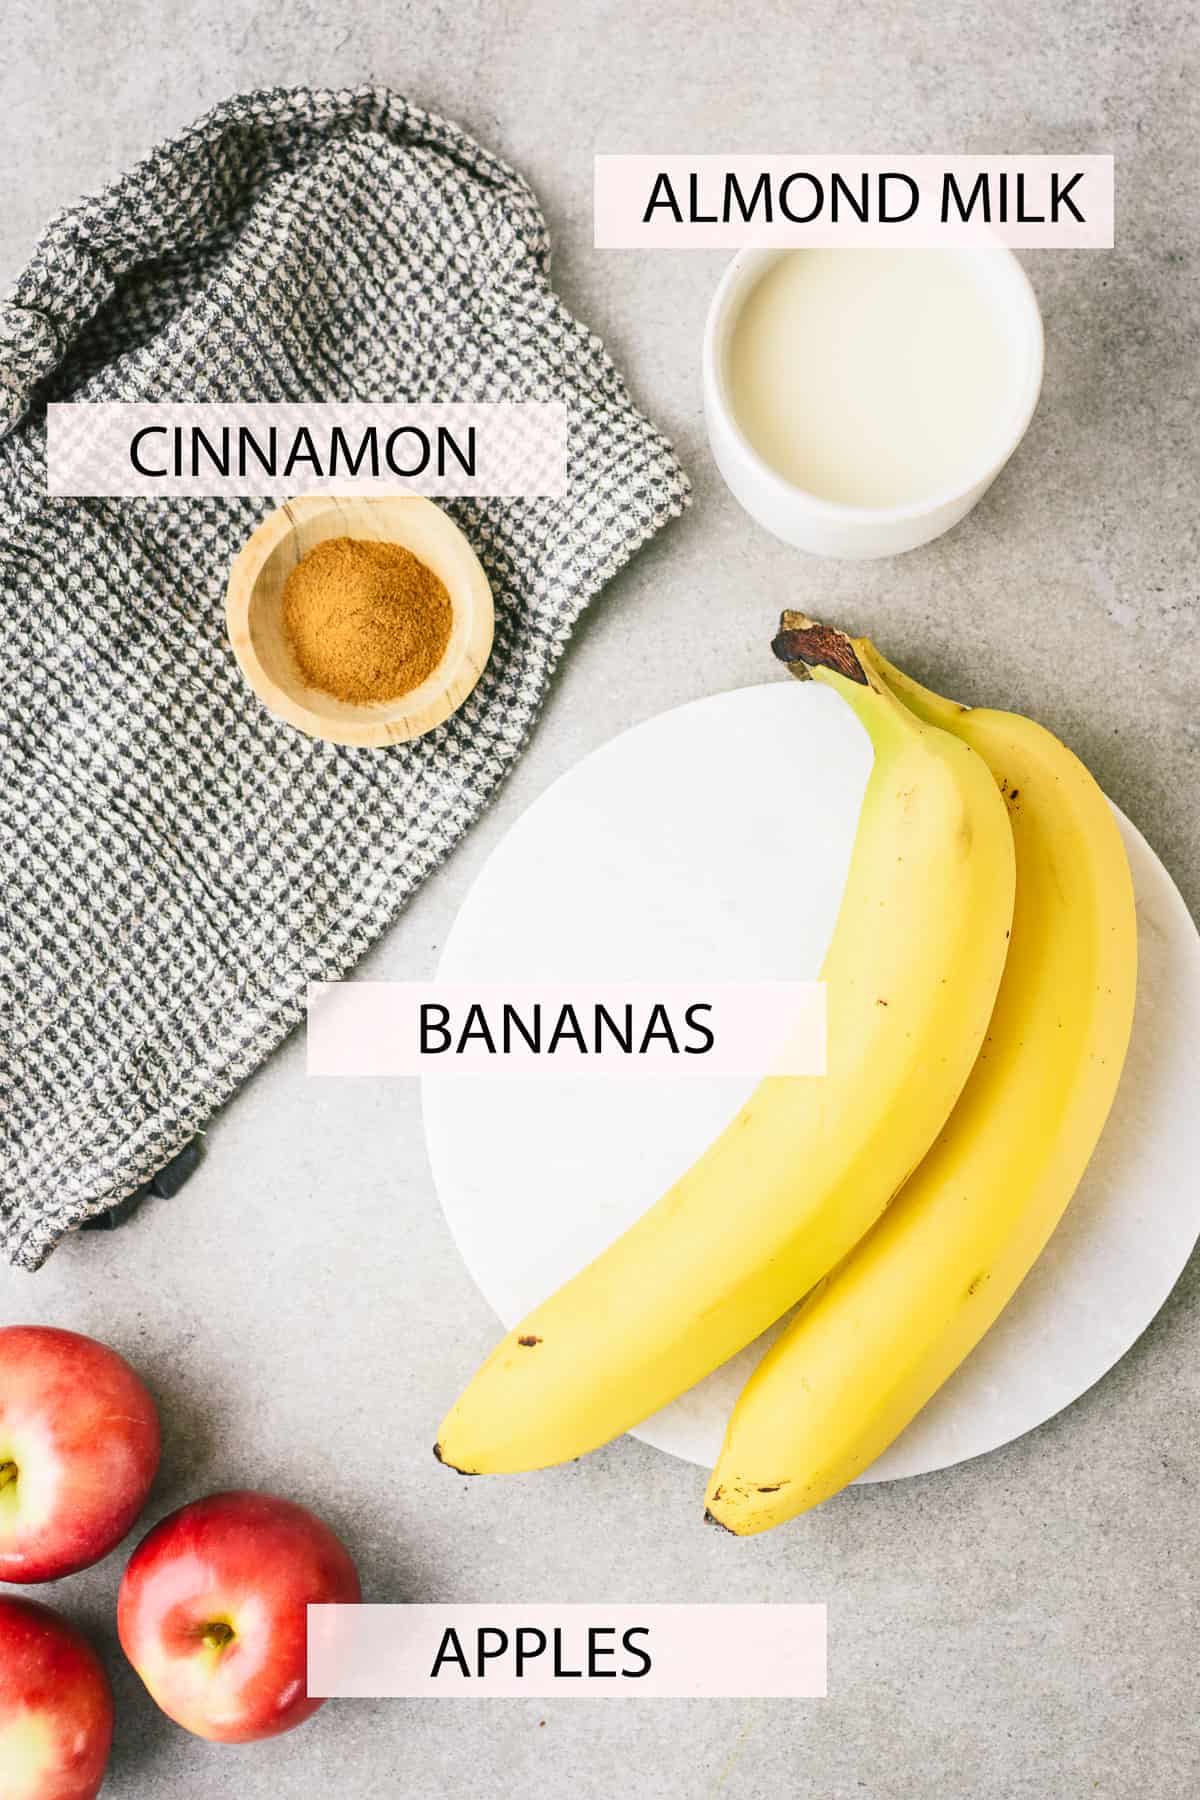 Labeled picture of ingredients, including almond milk, cinnamon, two bananas and three apples.